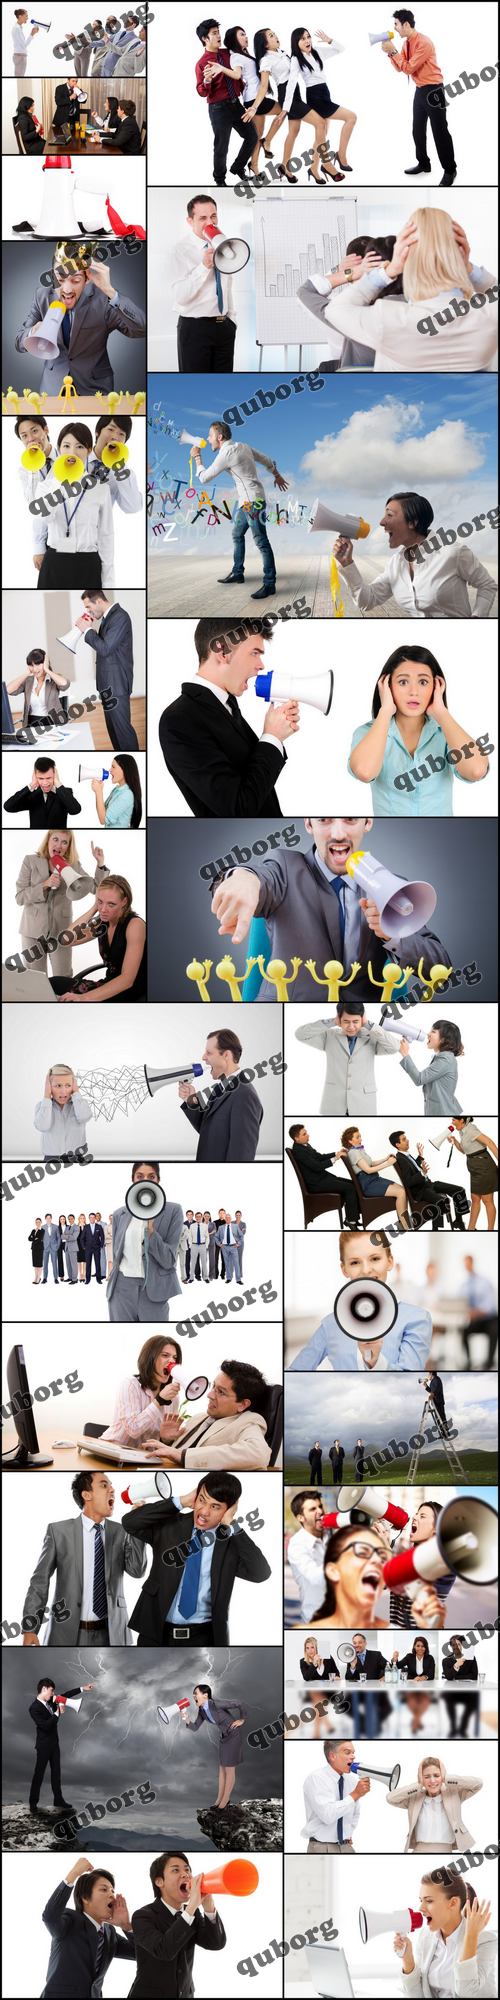 Stock Photos - Business Team With Megaphone 2